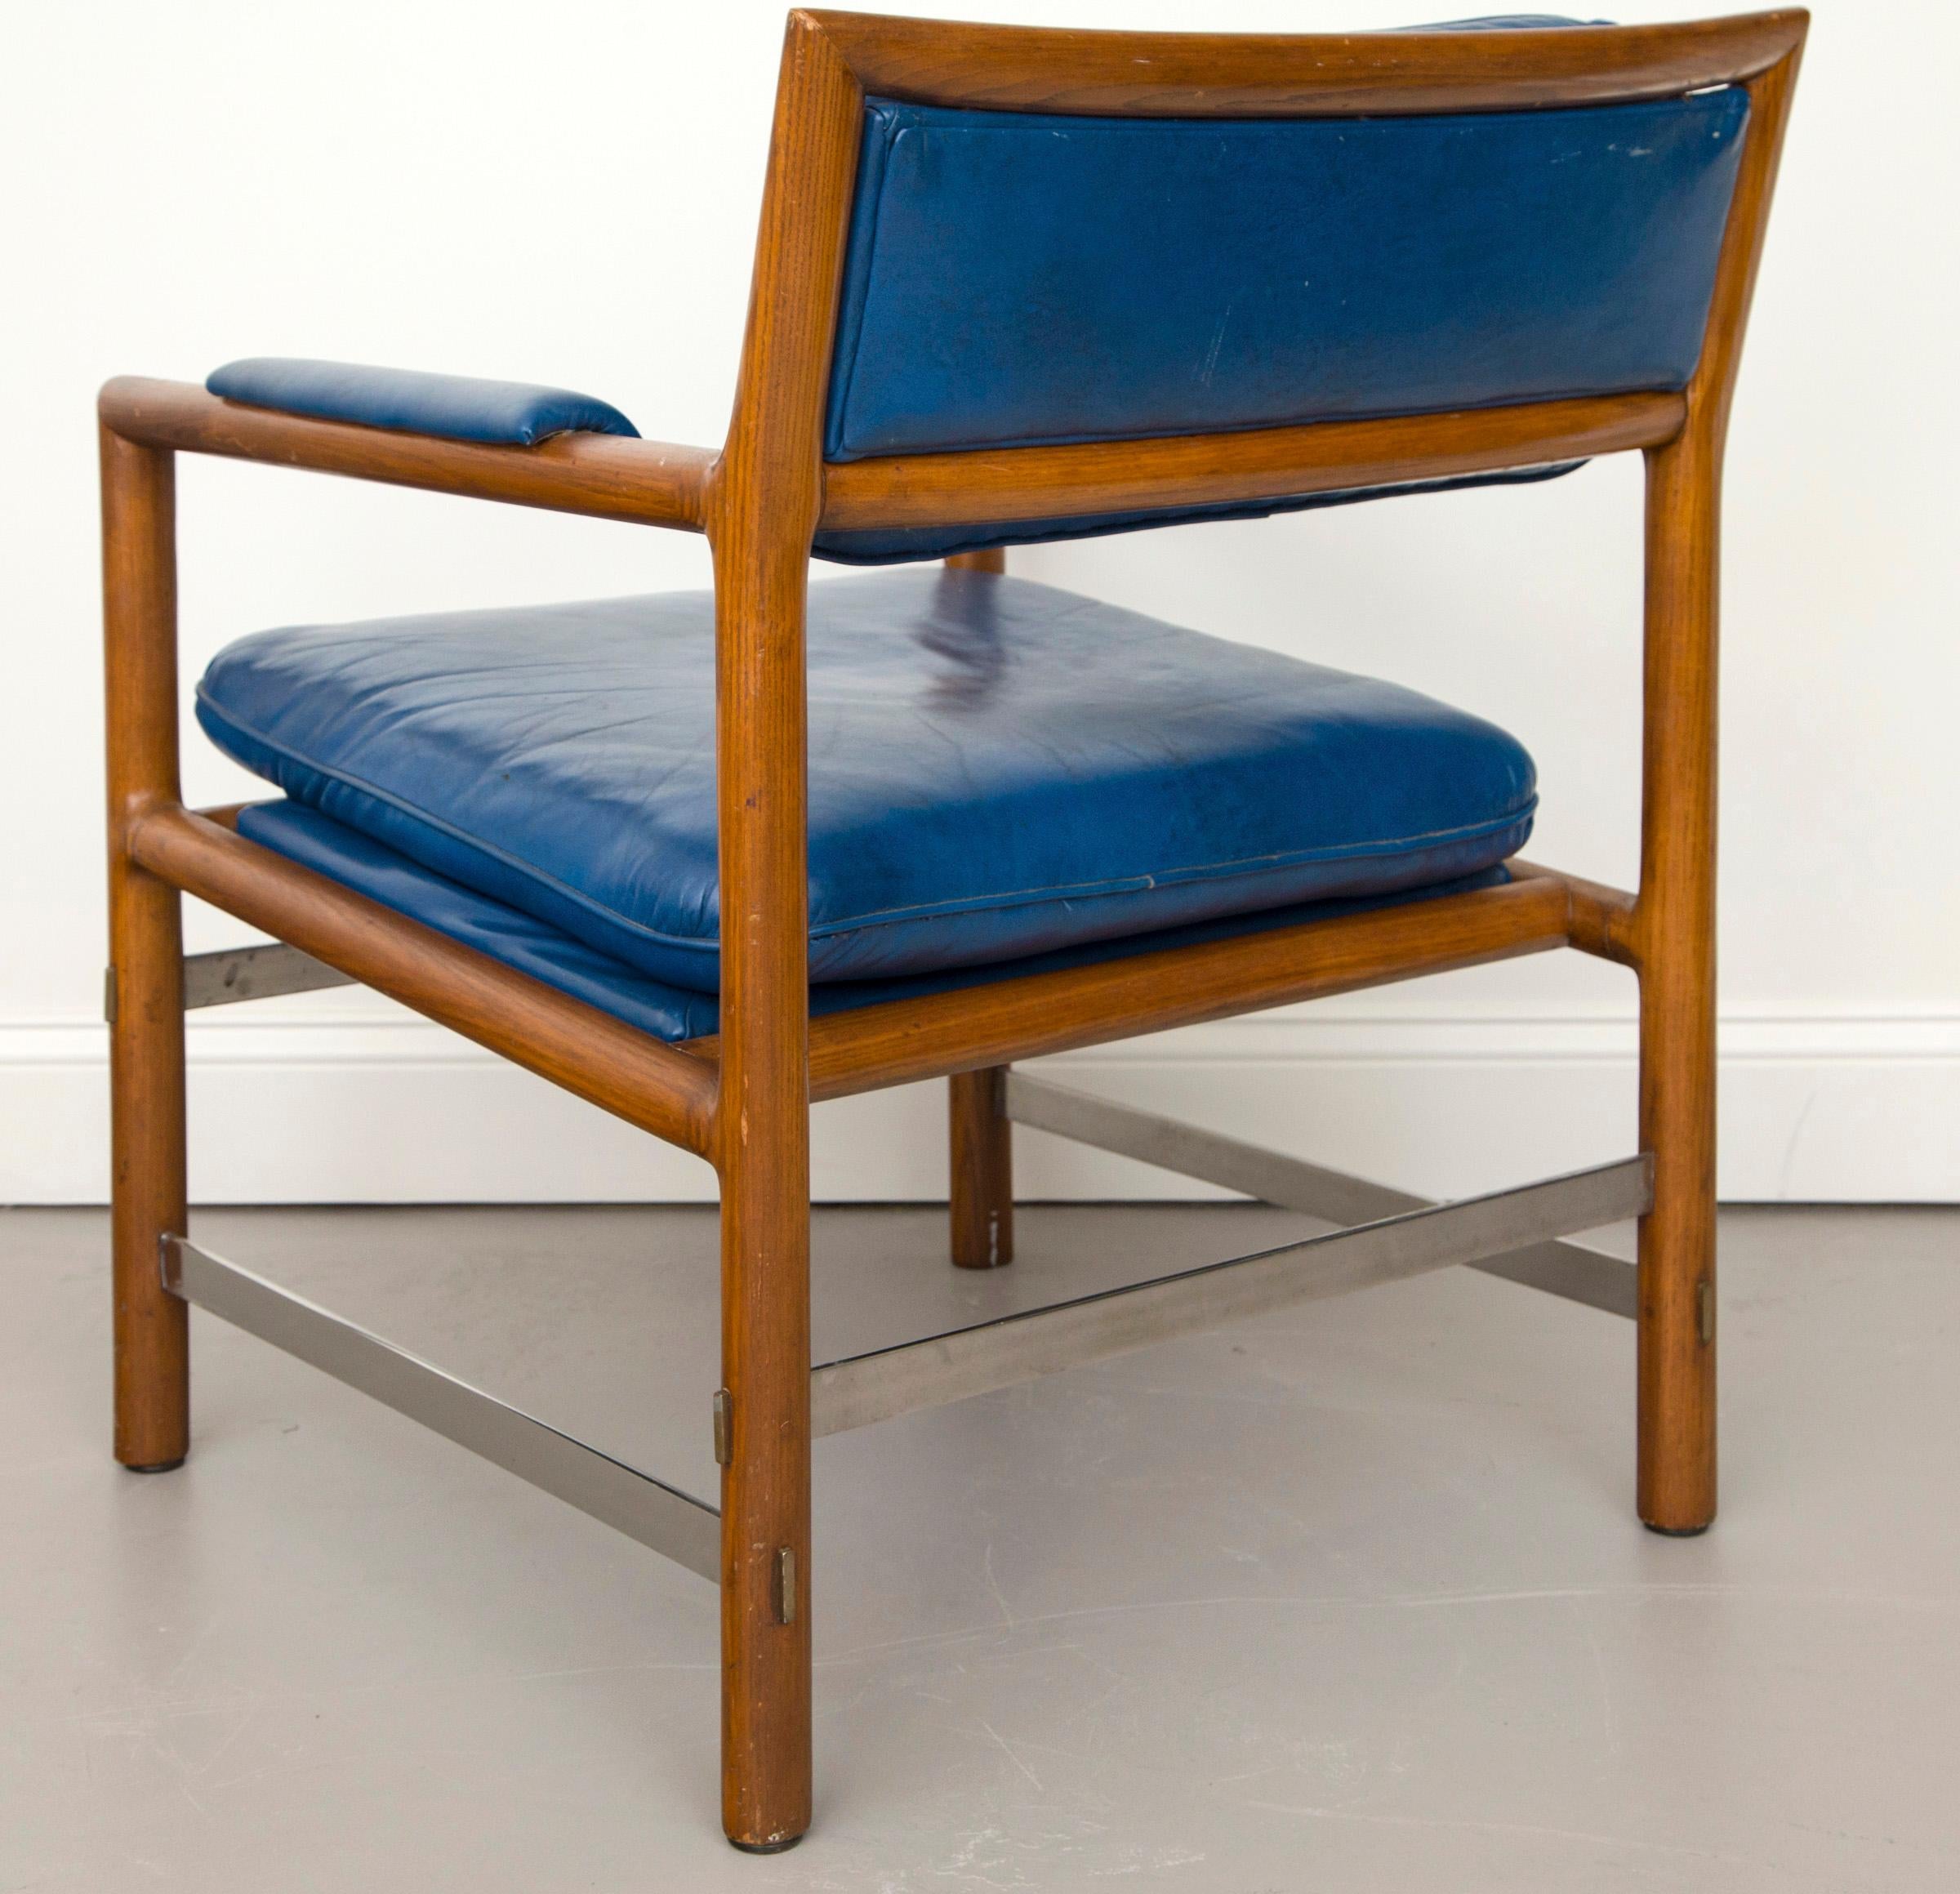 Ed Wormley for Dunbar Blue Leather, Wood and Stainless Steel Chairs, Set of 4 1